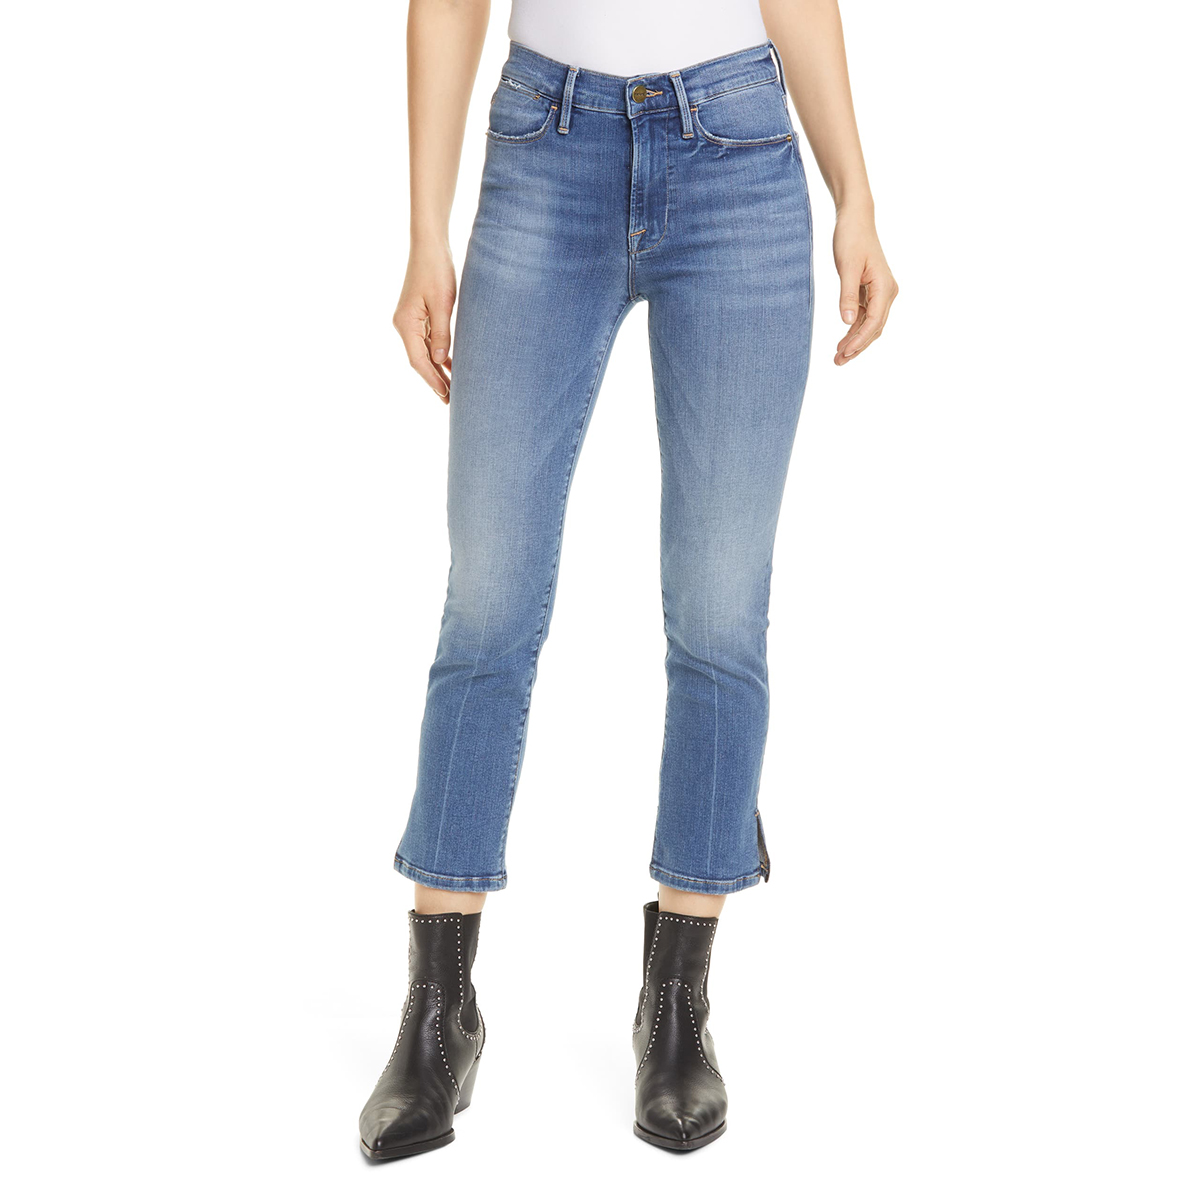 Nothing to Wear? Start With These Chic FRAME Jeans